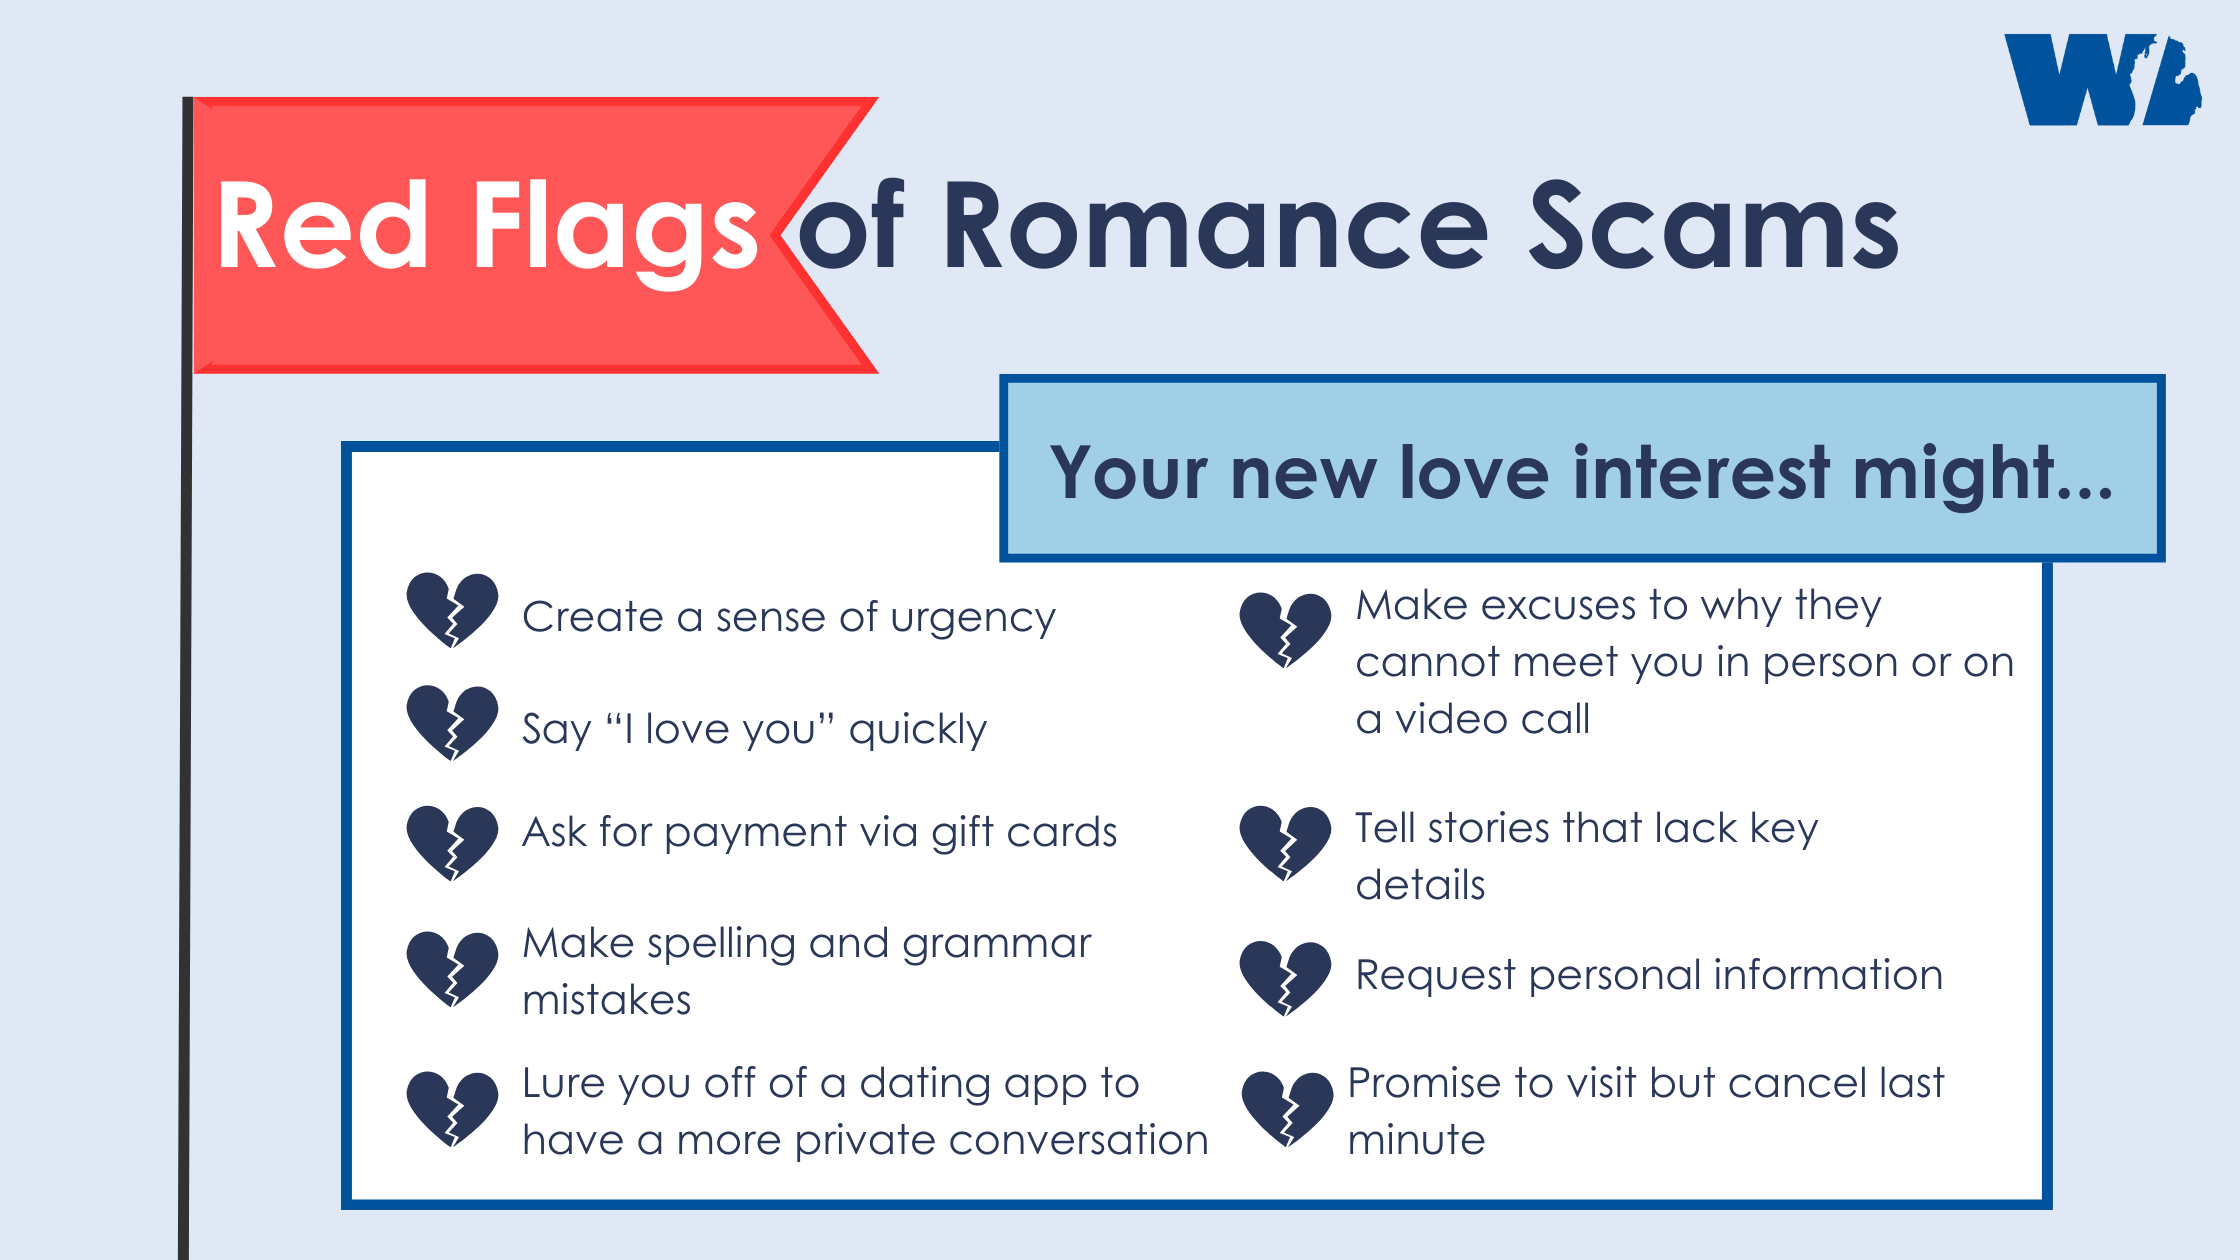 Learn 9 common red flags of romance scams to keep yourself and your money protected.